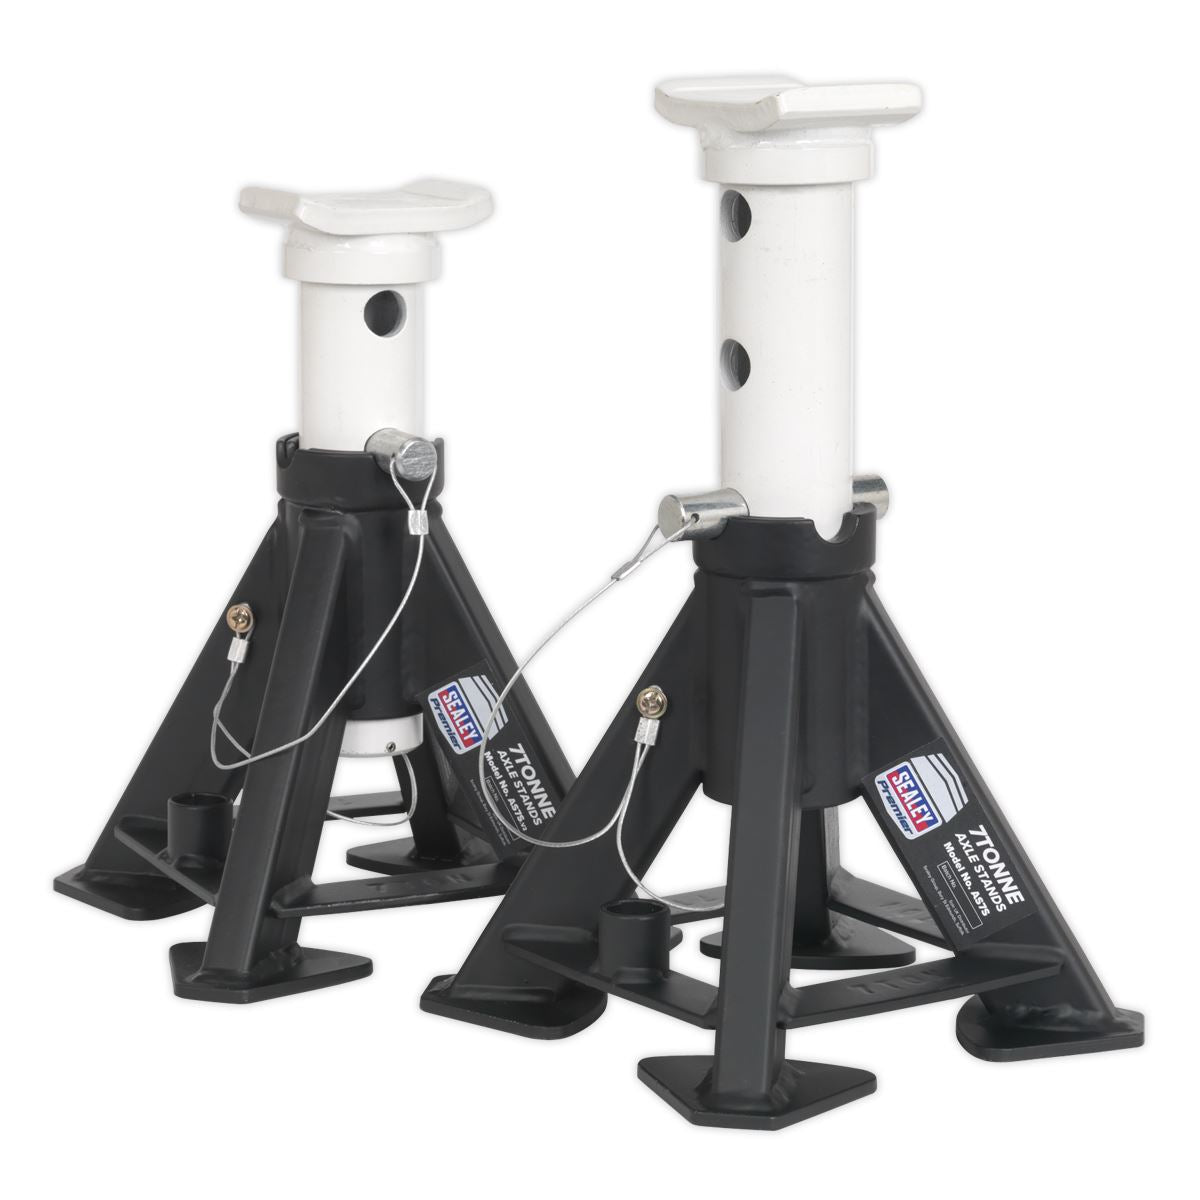 Sealey Premier Short Axle Stands (Pair) 7 Tonne Capacity per Stand